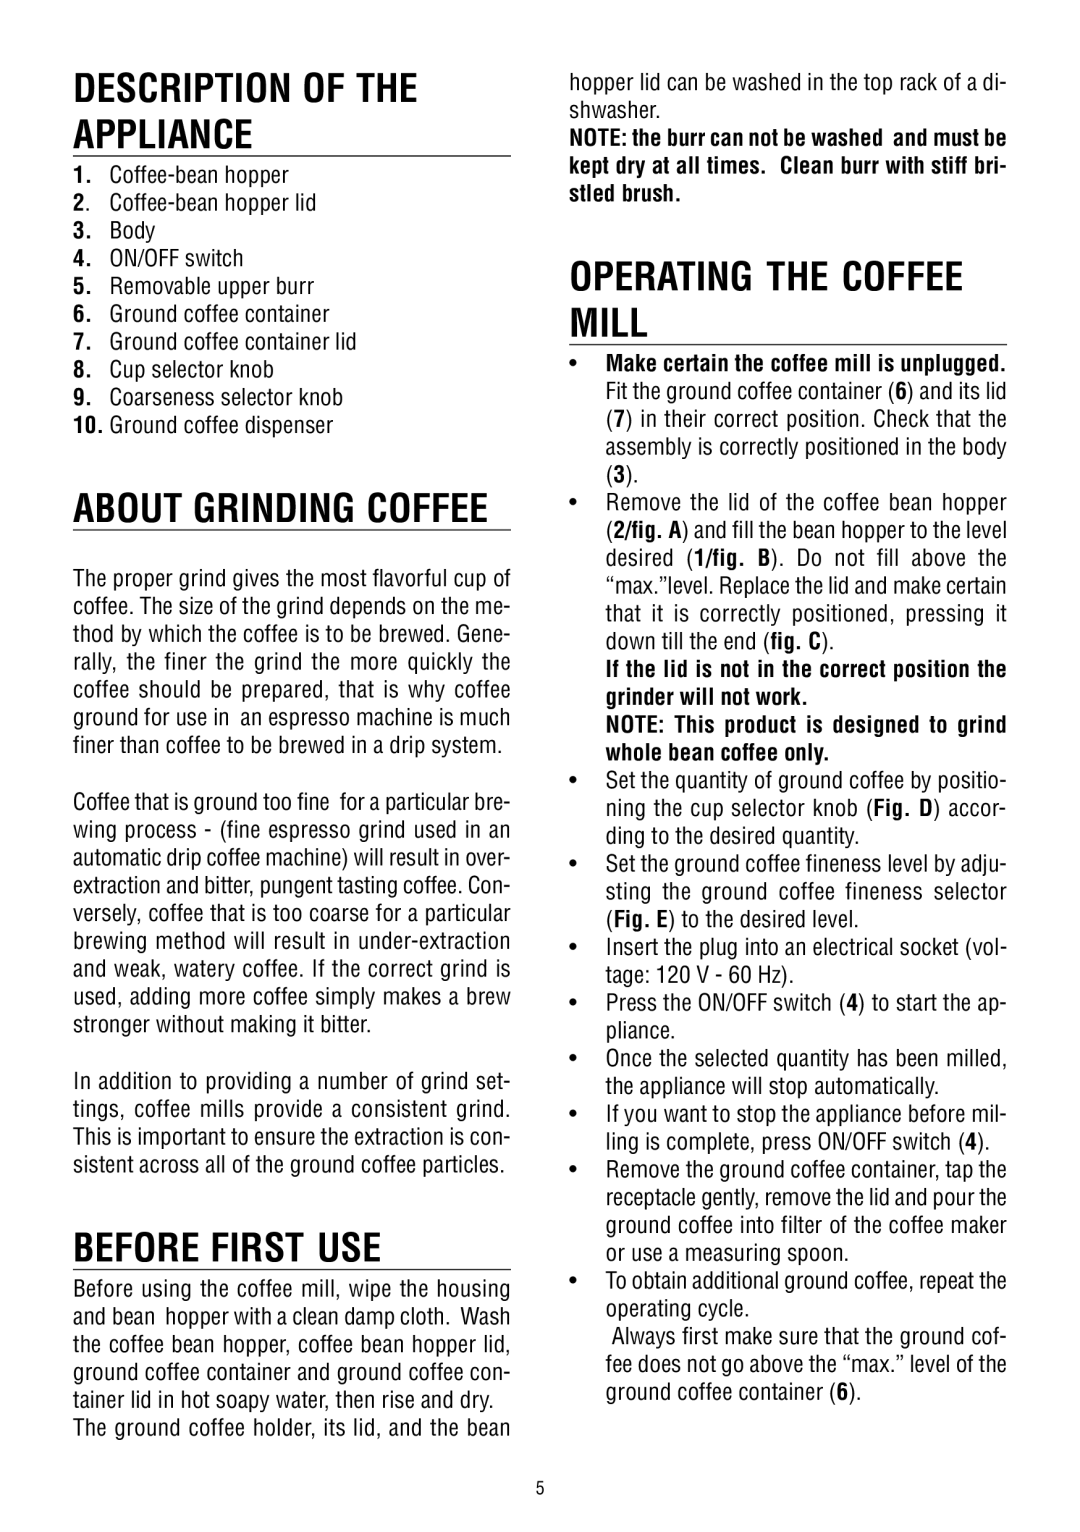 DeLonghi KG 79-89 manual Description Of The Appliance, Before First Use, Operating The Coffee Mill, About Grinding Coffee 